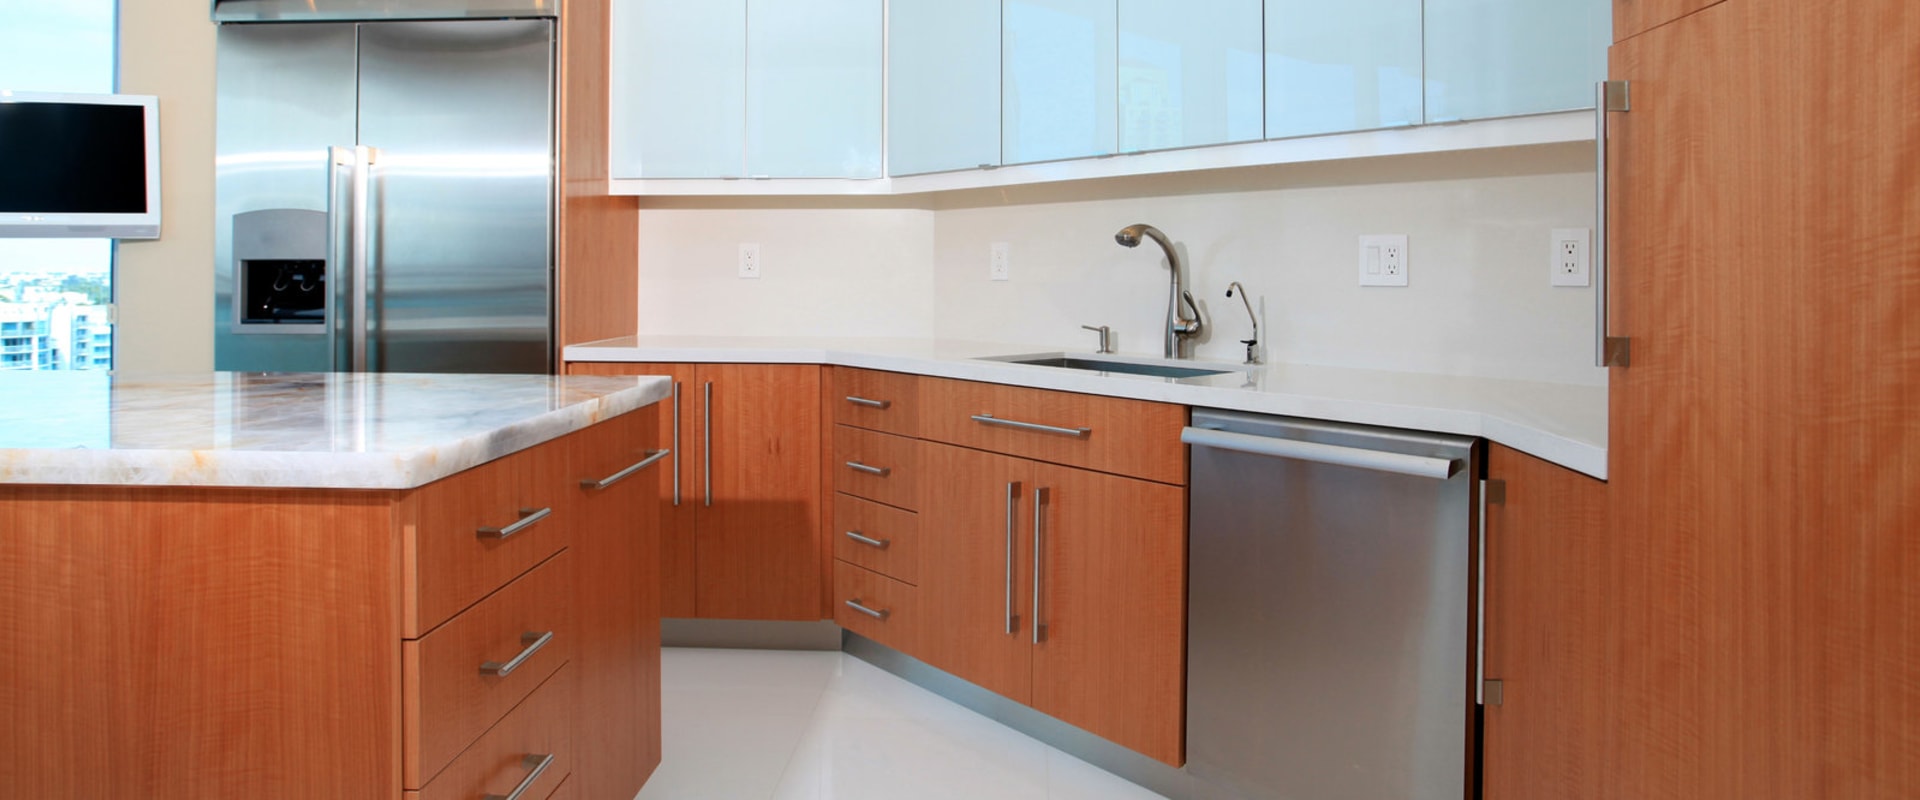 Why RTA Kitchen Cabinets Are Preferred When Updating Kitchen Cabinets During A Home Appraisal